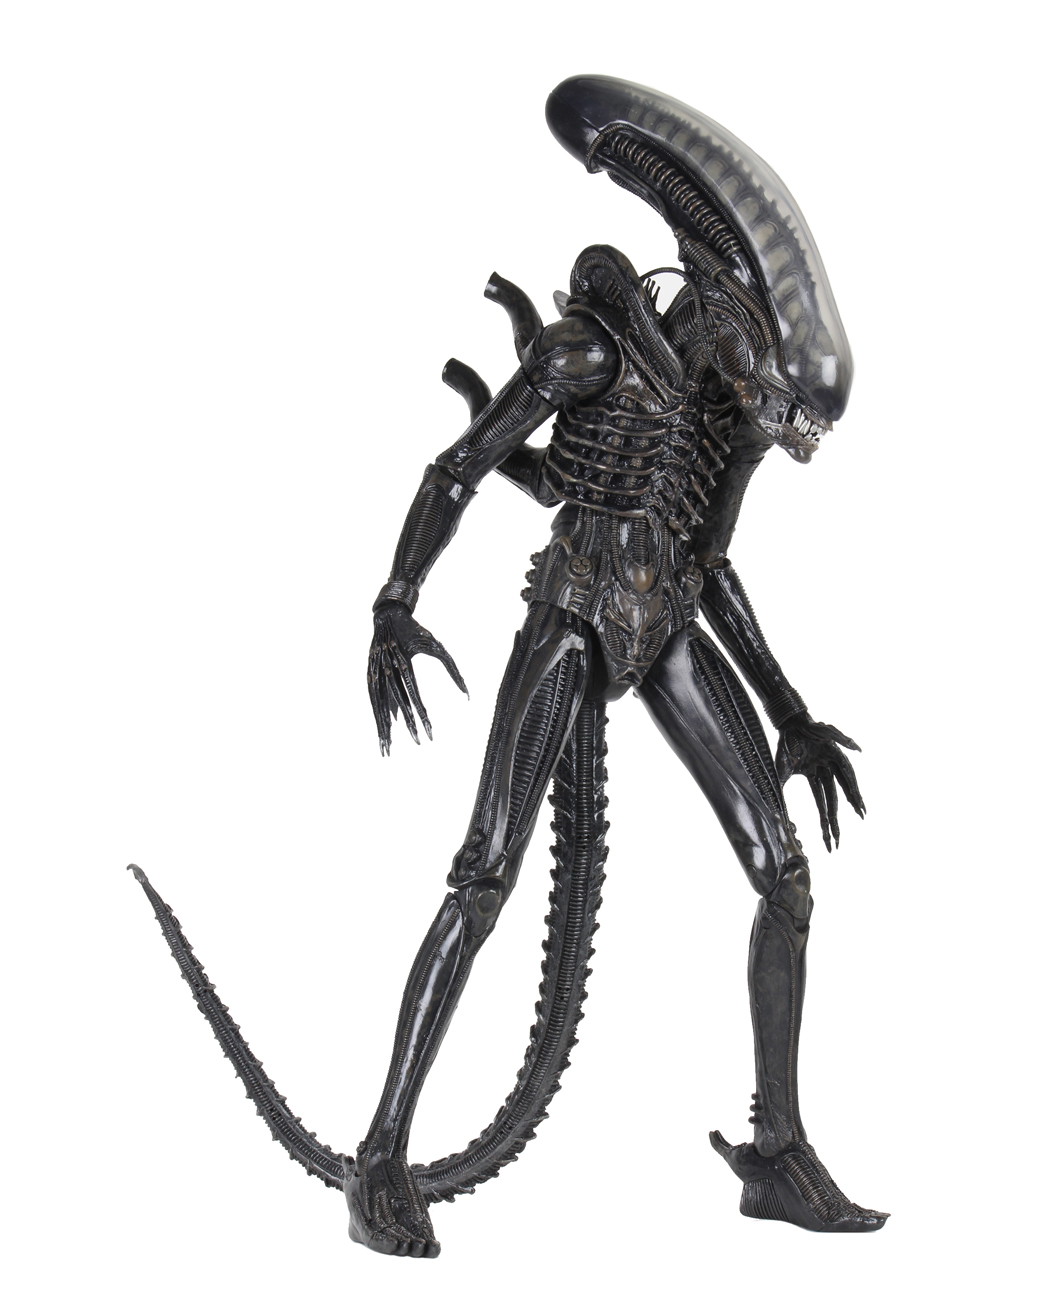 NECAOnline.com | Shipping This Week - Alien & Predator Classics, Quarter Scale Big Chap, and Restocks of Friday the 13th Part 6 Ultimate Jason!